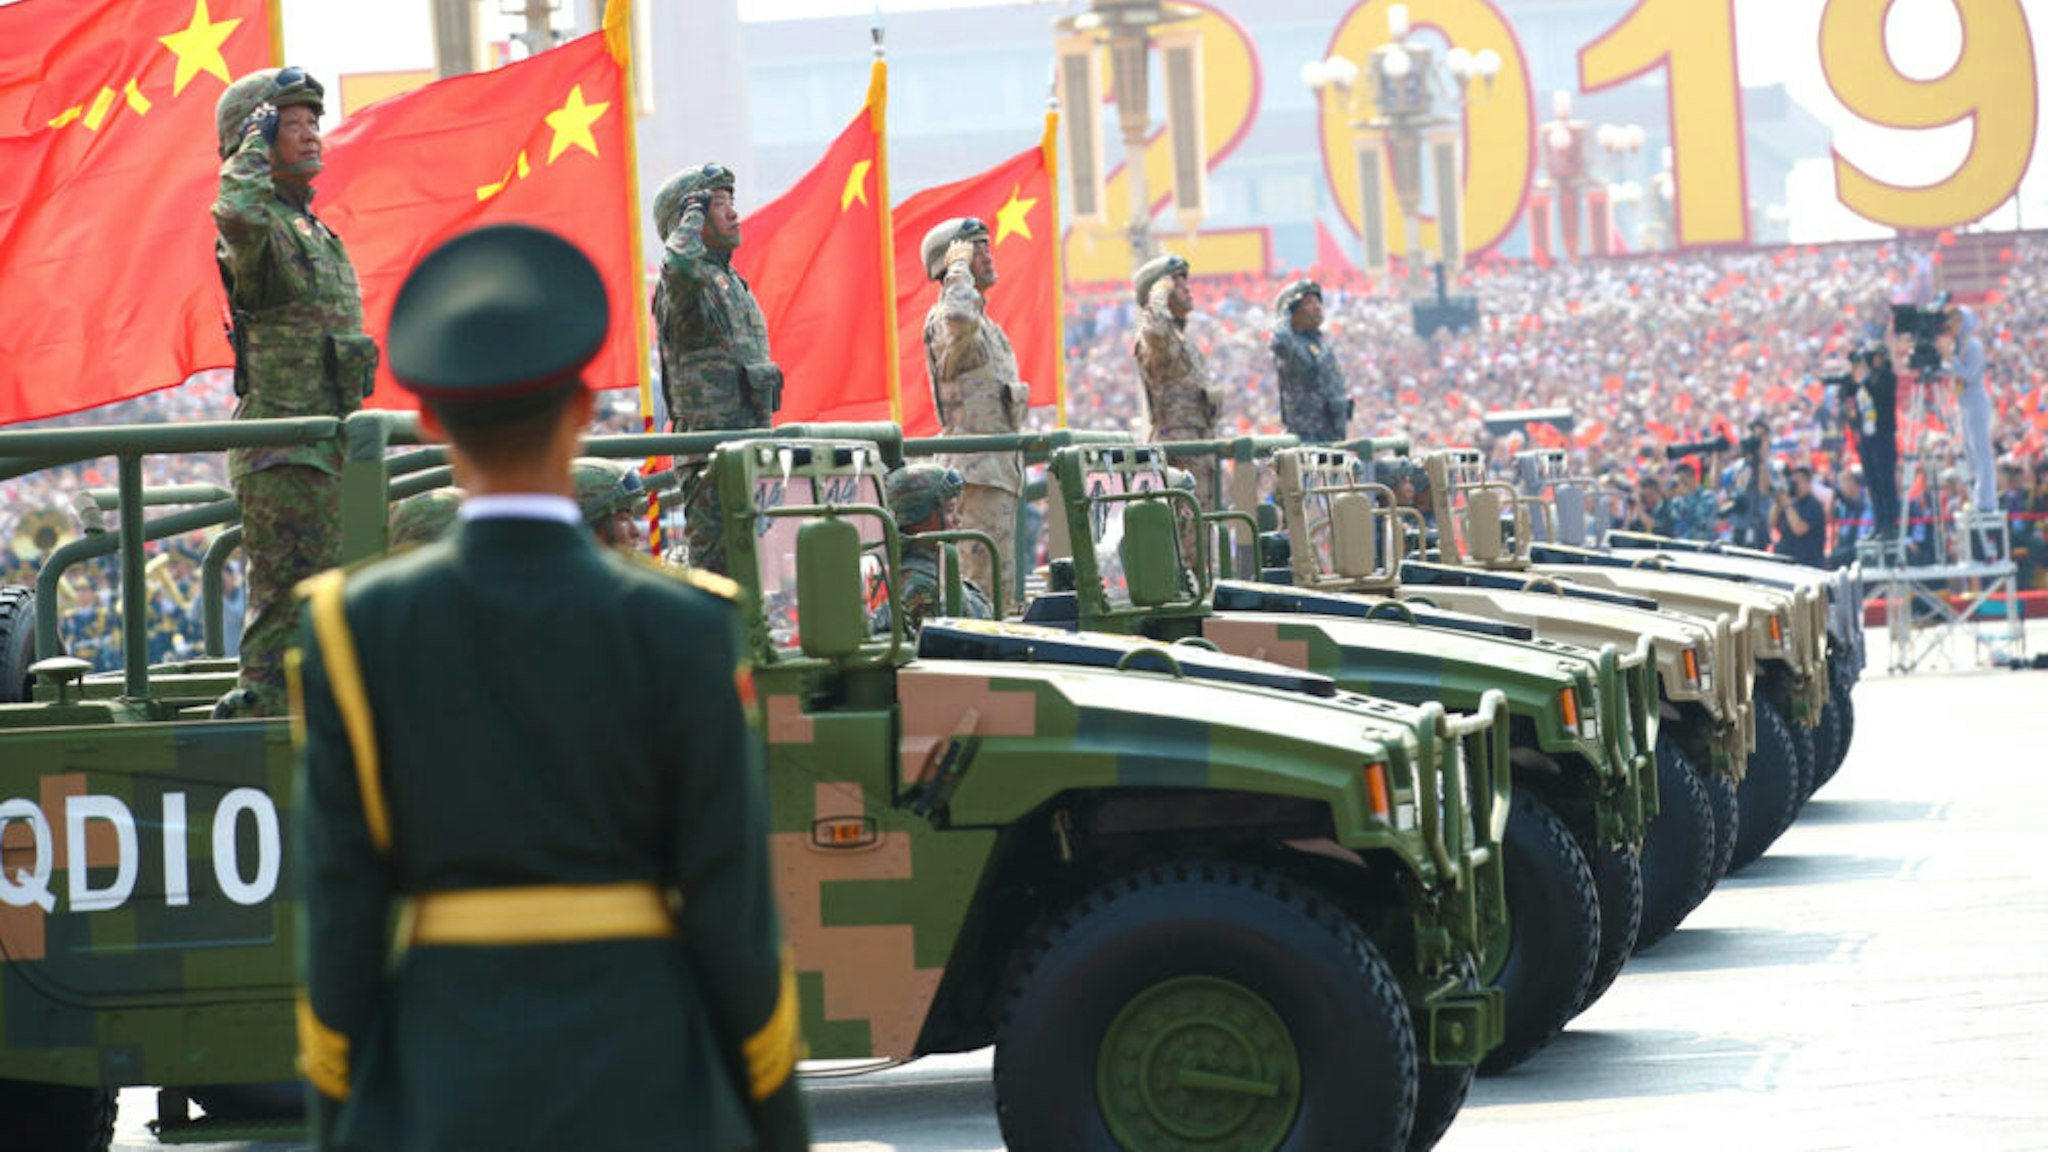 BEIJING, Oct. 1, 2019 -- A formation of military flags takes part in a military parade during the celebrations marking the 70th anniversary of the founding of the People's Republic of China at the Tian'anmen Square in Beijing, capital of China, Oct. 1, 2019.